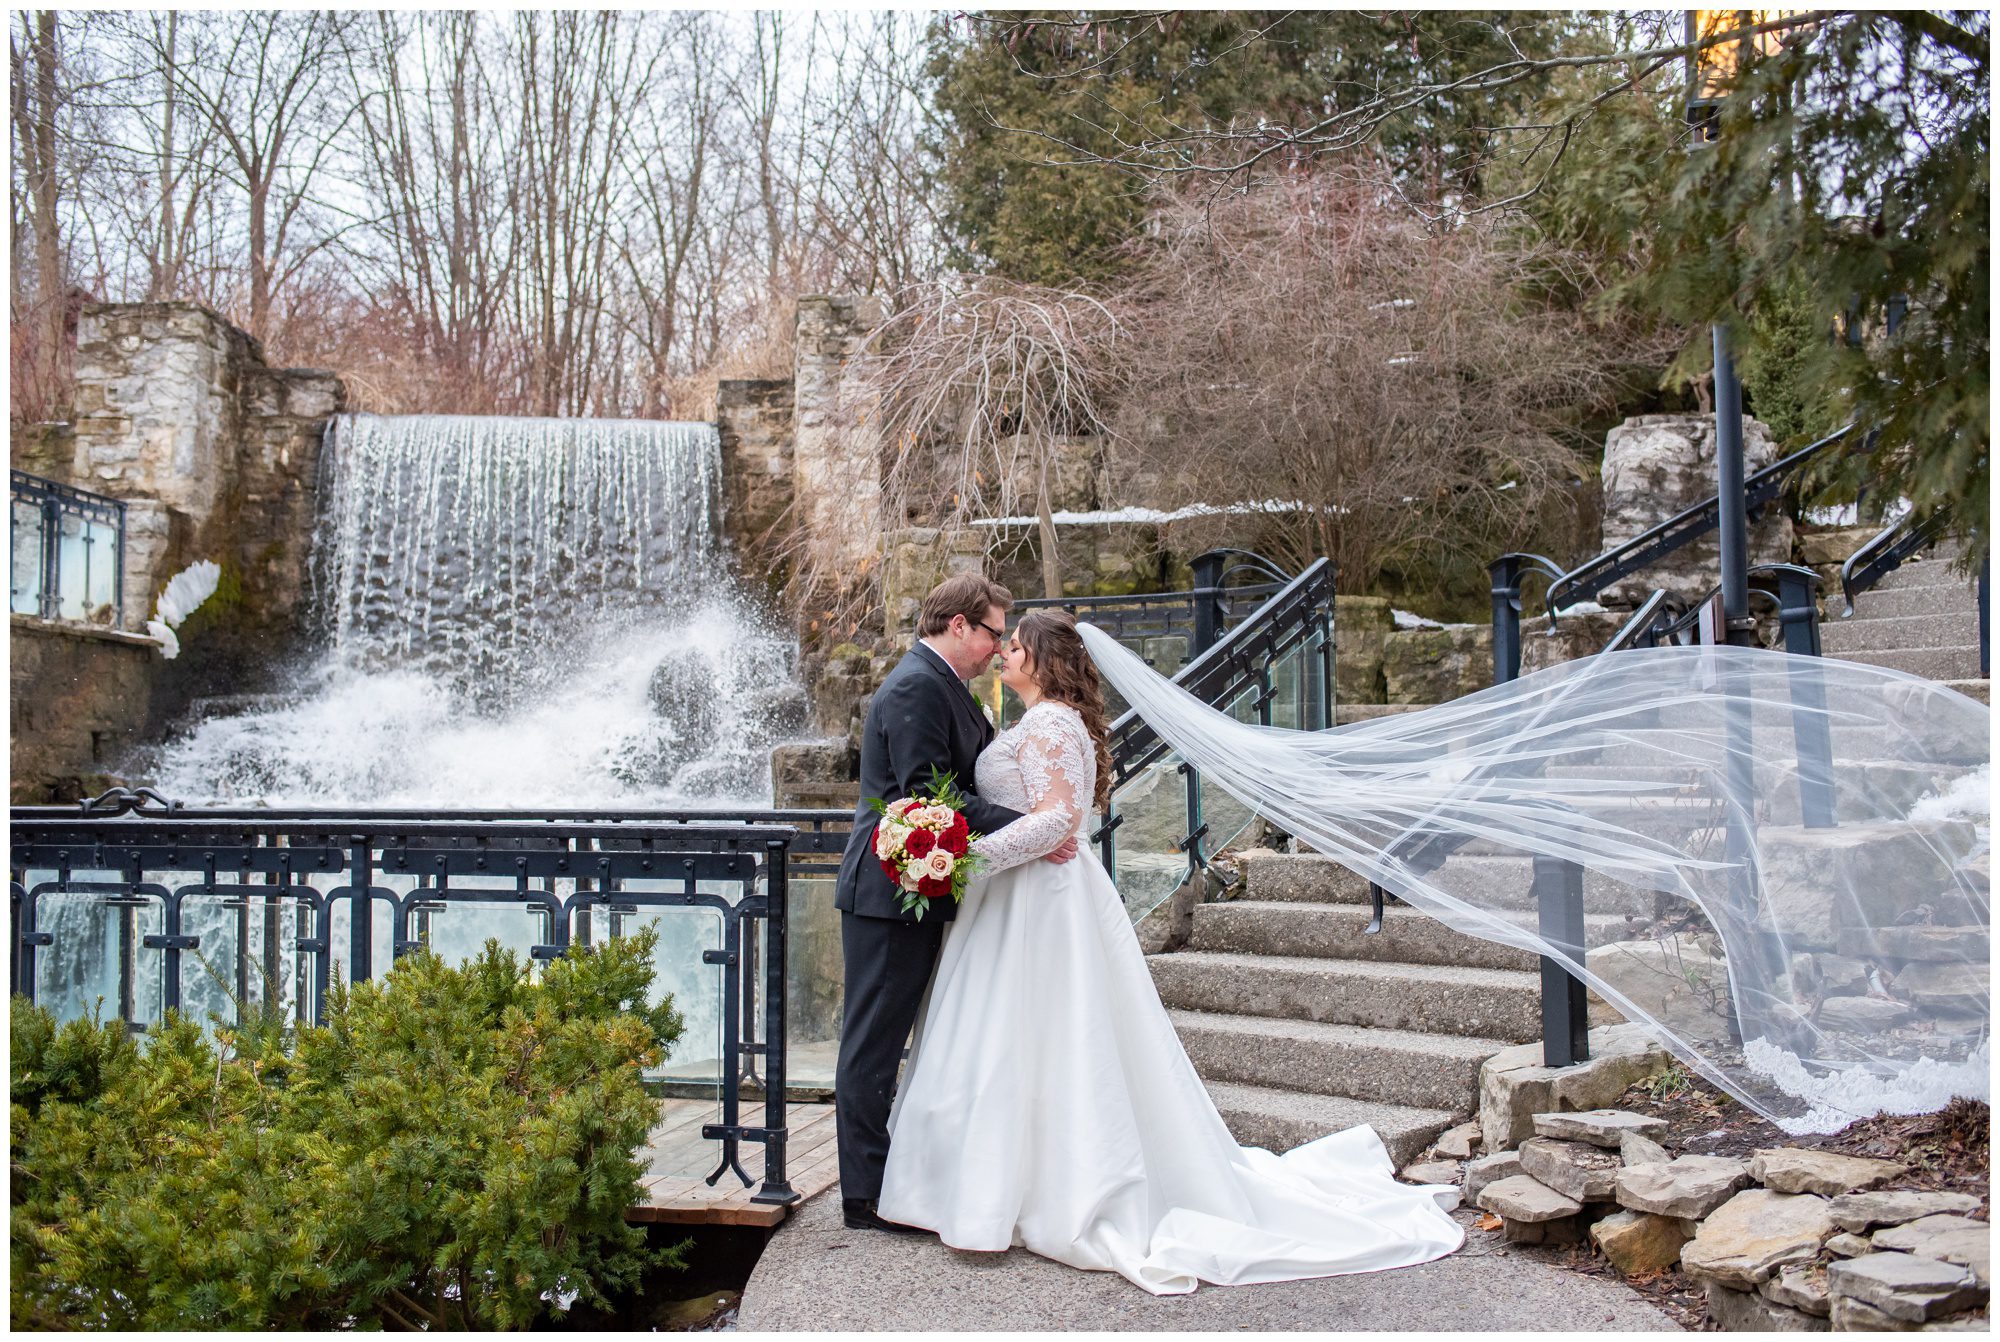 Bride and groom facing each other with veil flying in front of waterfall at Ancaster Mill.